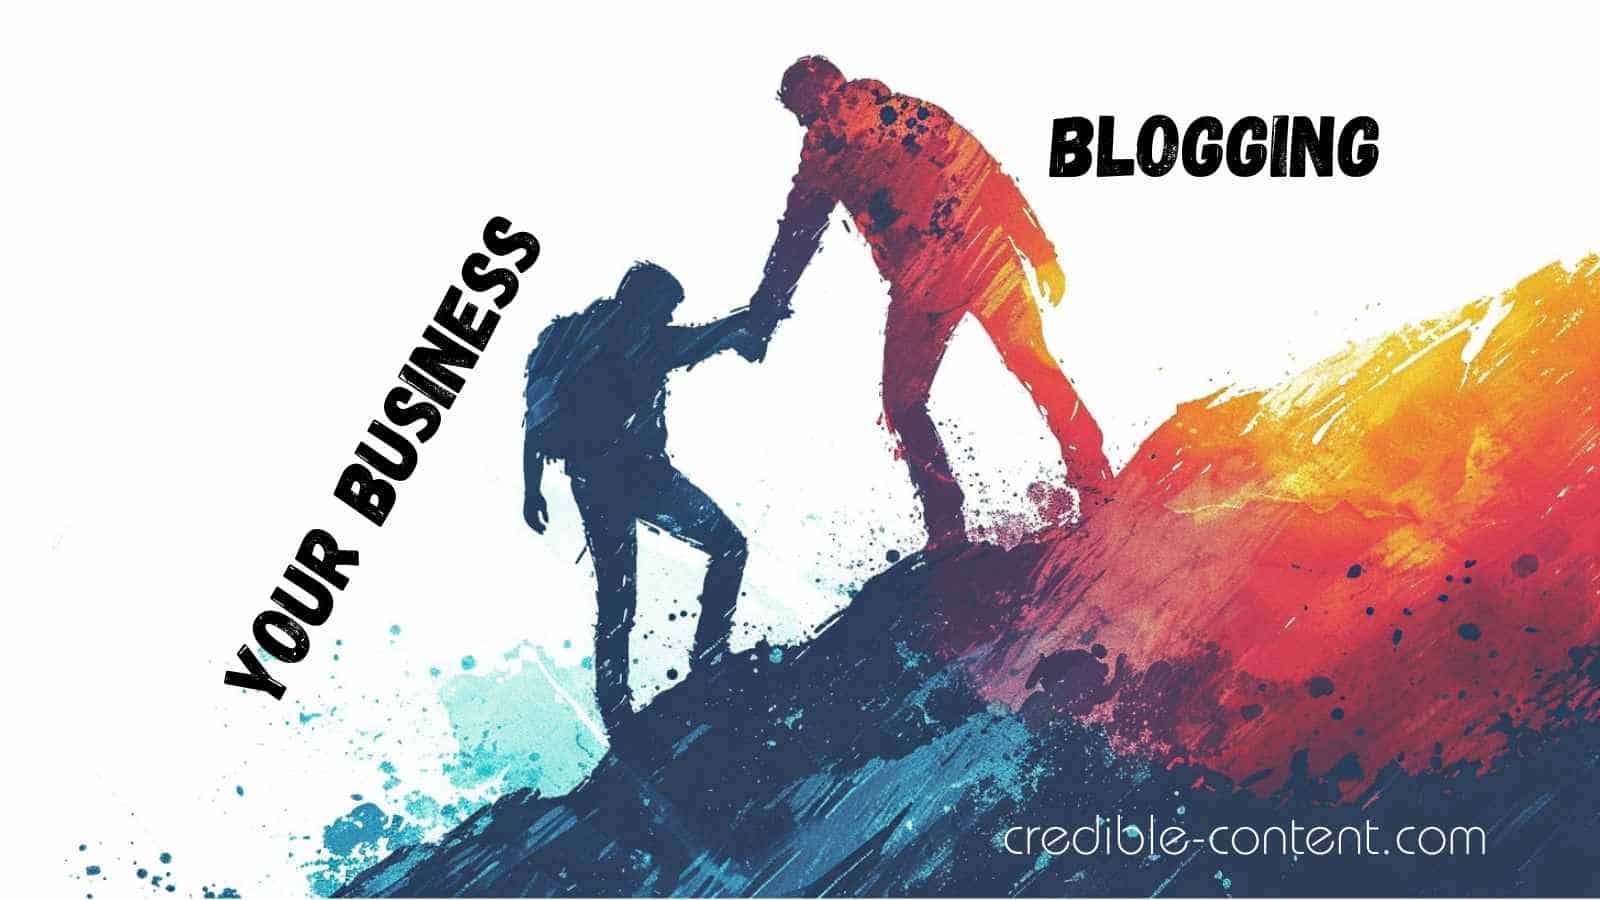 How my blog writing service helps your business